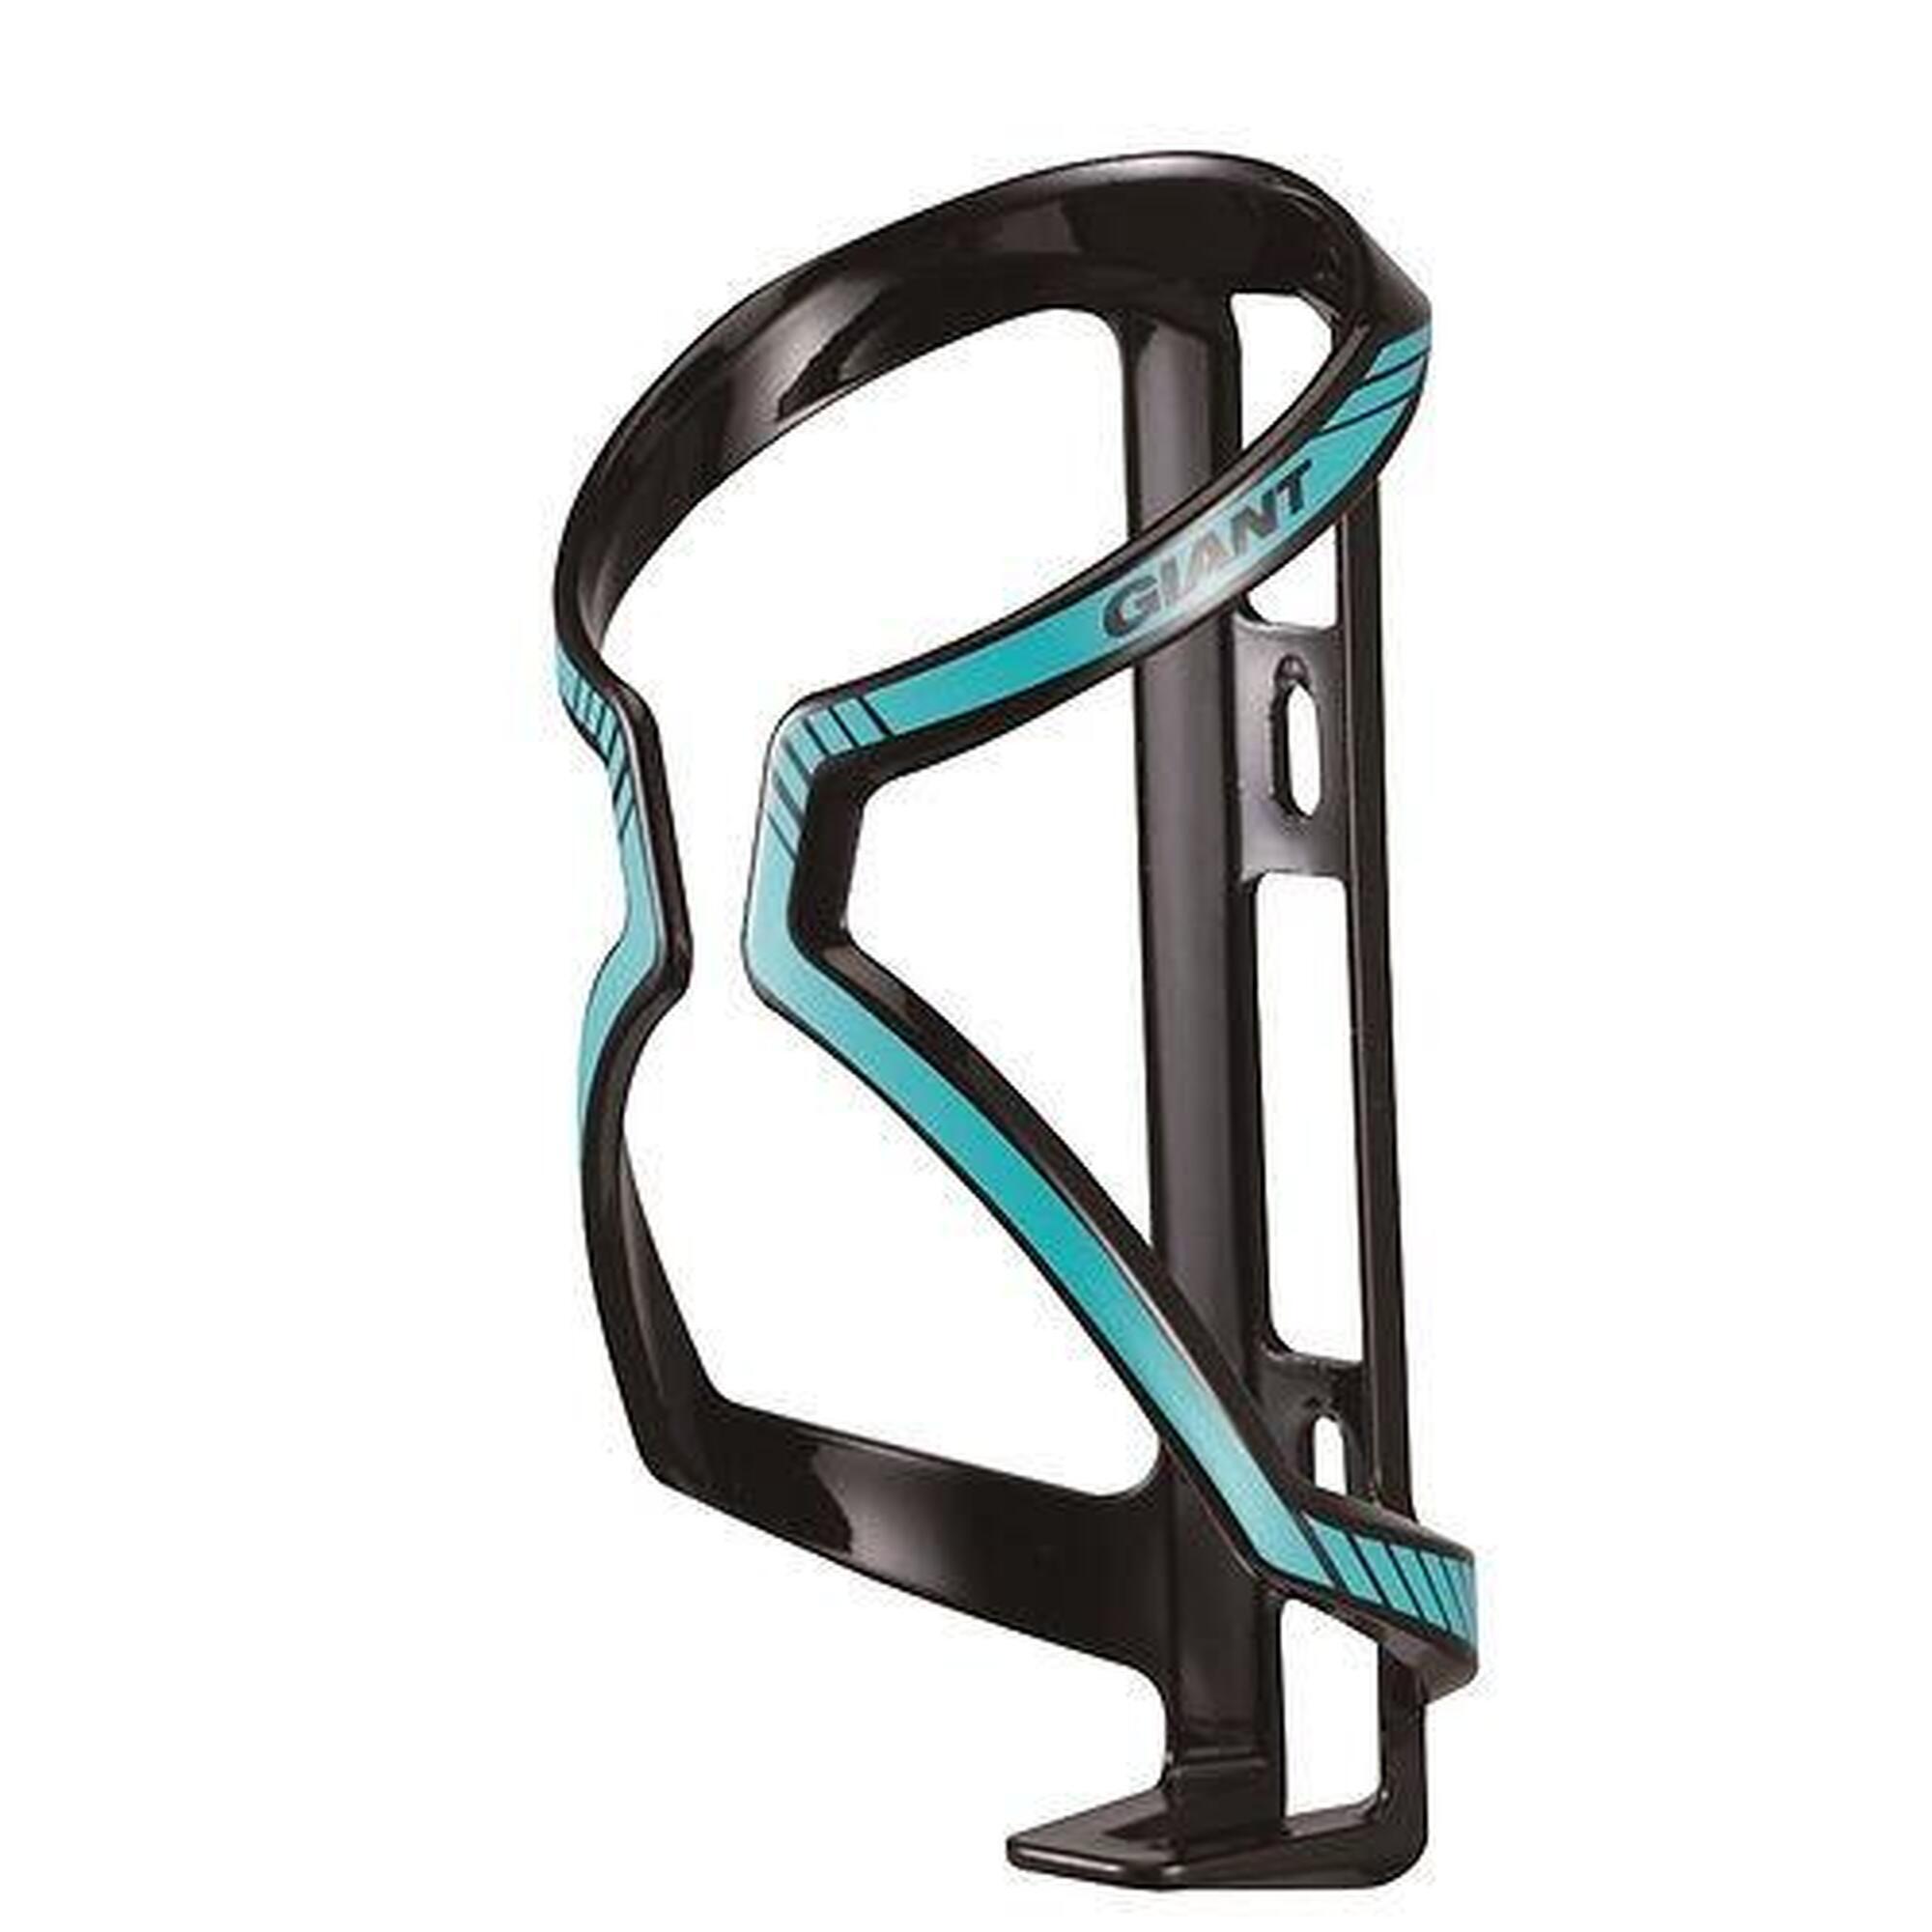 AIRWAY SPORT Bottle Cage - BLACK/GLOSSBLUE